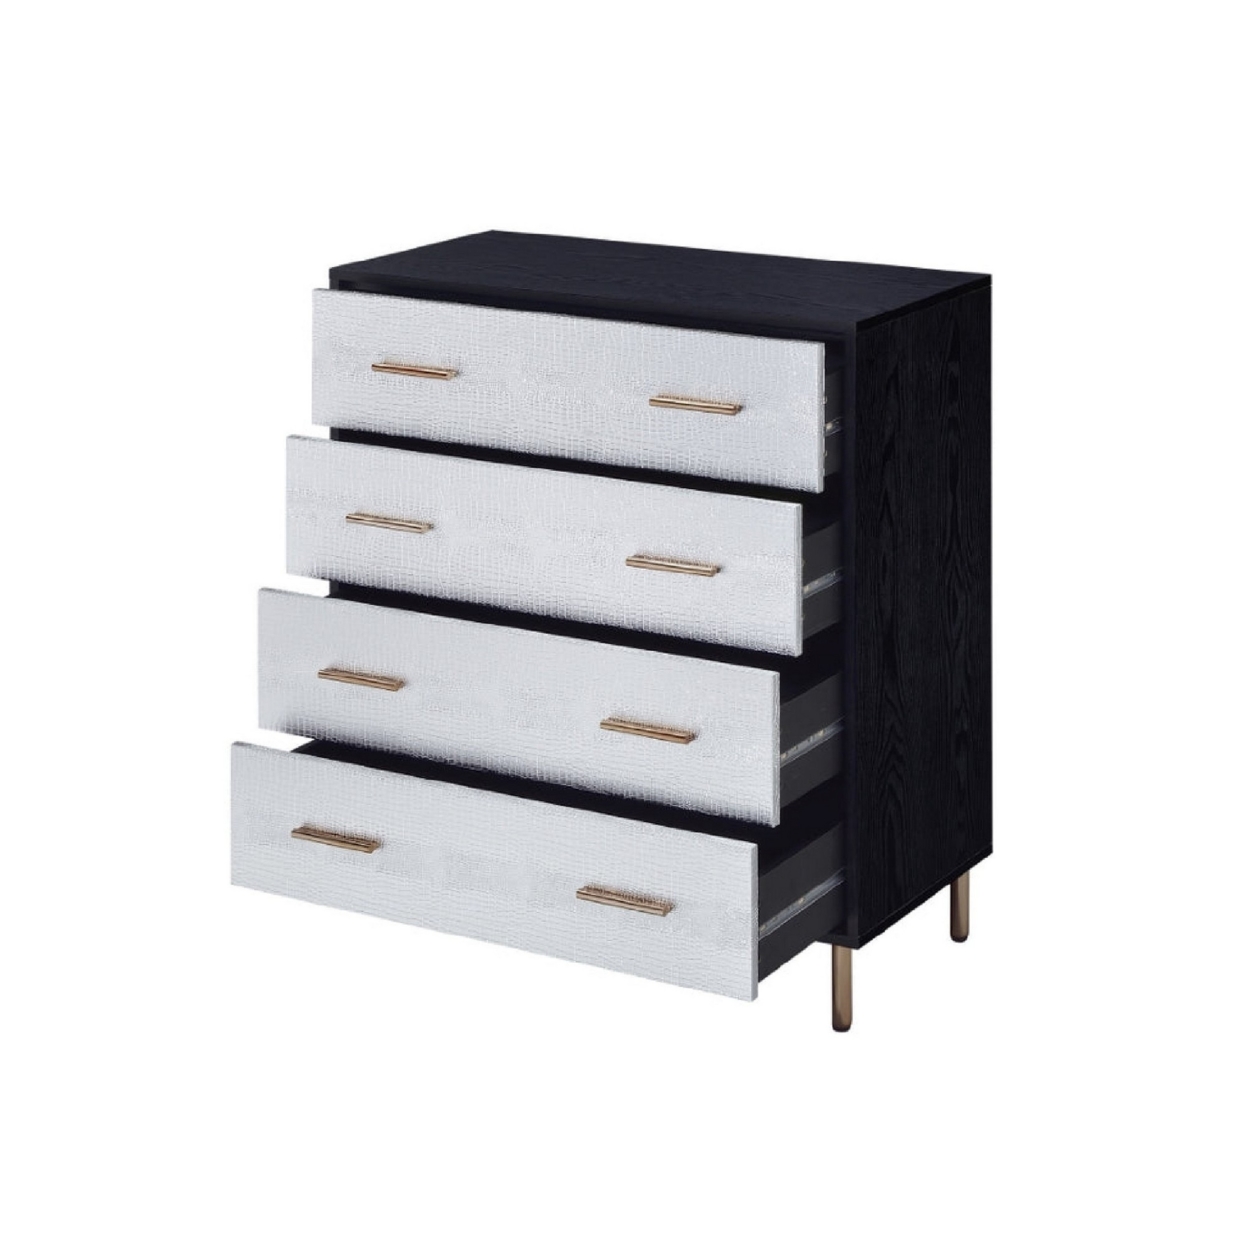 Emily 37 Inch Wood Tall Dresser Chest, 4 Drawers, Gold Handles, Black